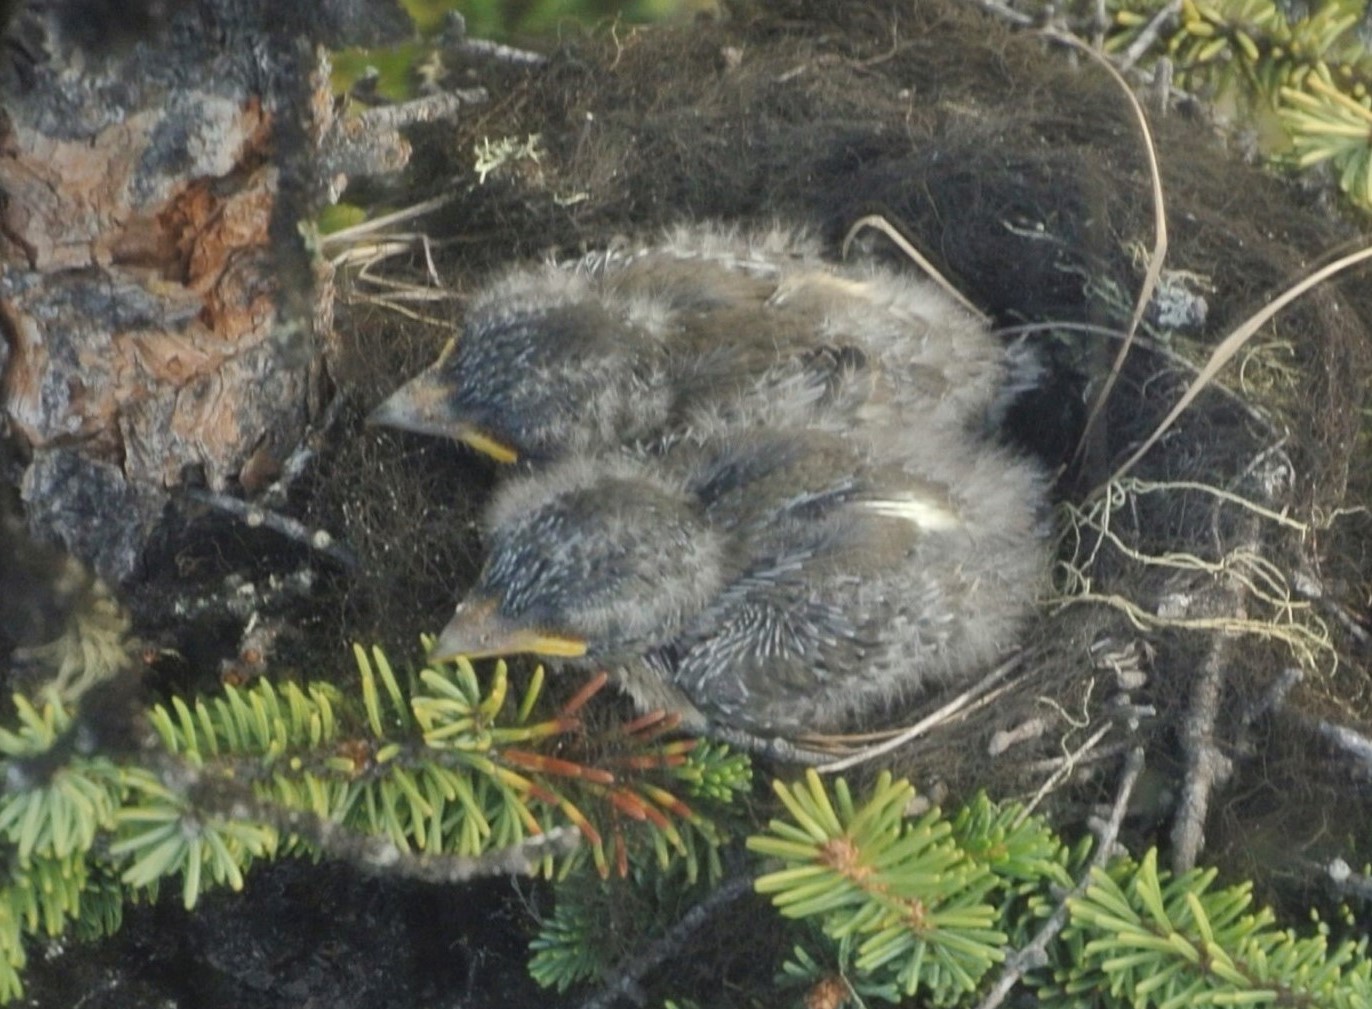 Two Olive-sided Flycatcher nestlings. Broods usually contain 2-4 eggs and chicks. Alaska nests are often built in black spruce habitat in live trees. Nests constructed of sticks and lined with lichen. - Alaska Department of Fish and Game (ADFG)